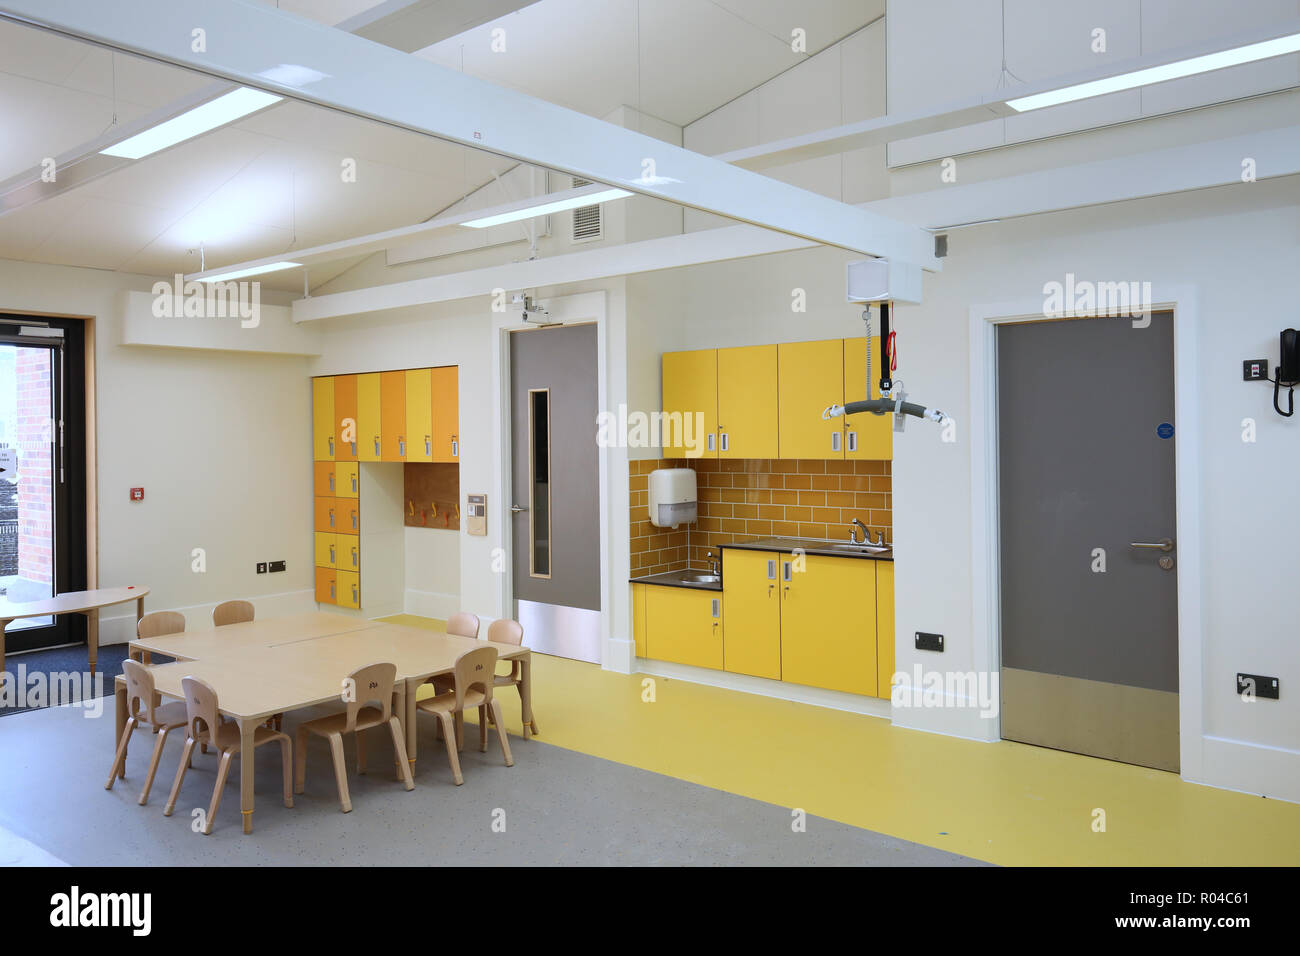 Classroom in a brand new special school for children with severe learning difficulties, Southwark, London, UK. Shows disabled lifting hoist. Stock Photo